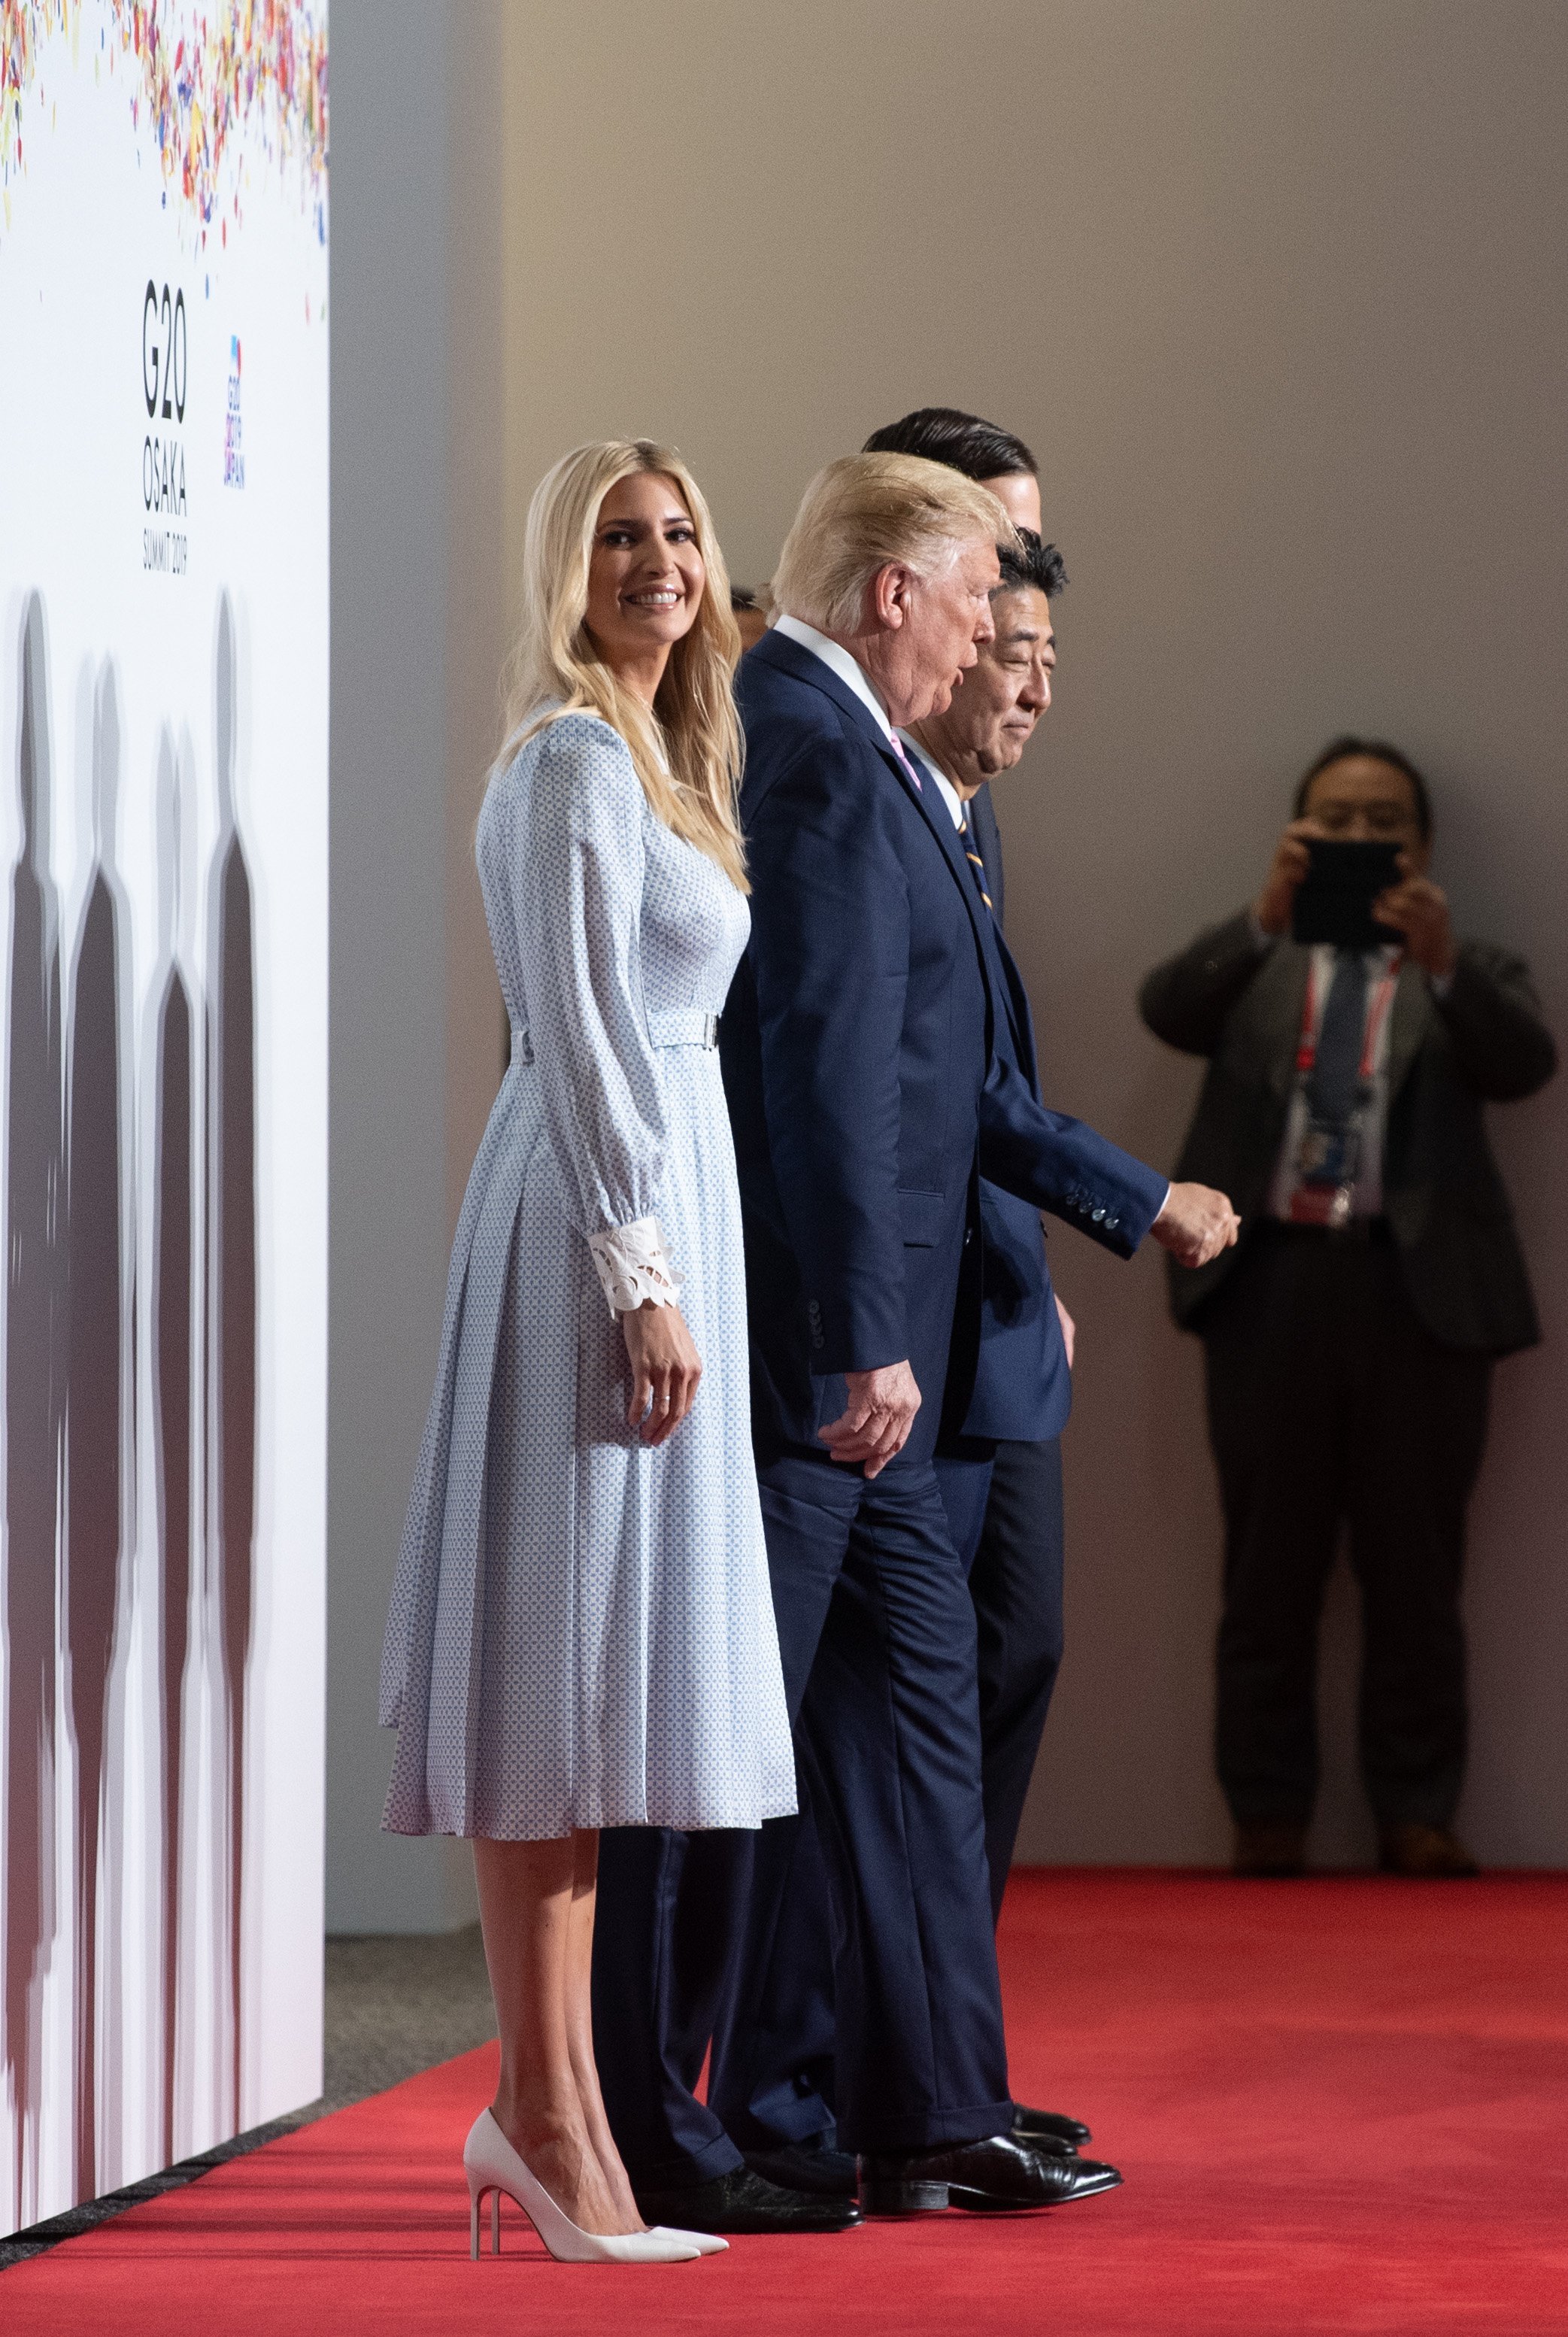 Ivanka Trump with Donald Trump and Japan's Prime Minister Shinzo Abe posing for a group photo at the G20 summit in Osaka, Japan | Photo: Getty Images